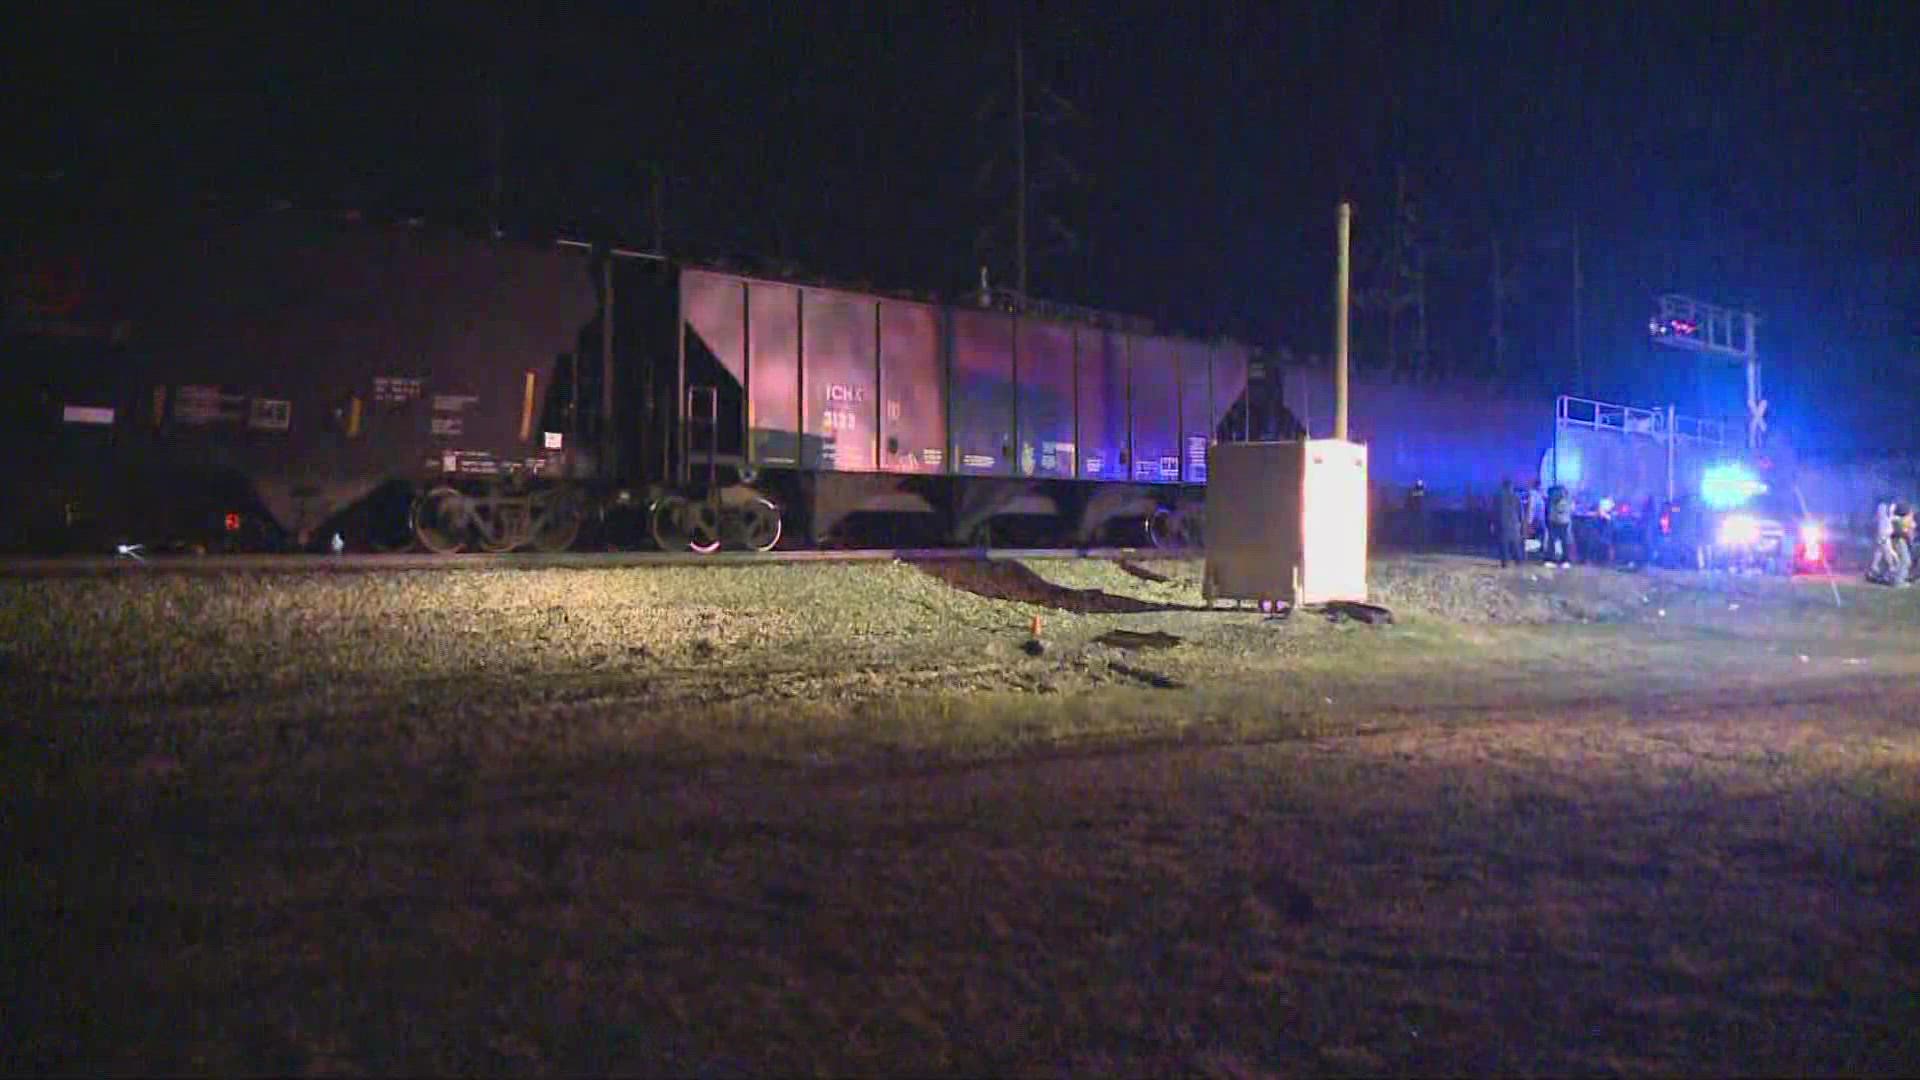 A train had to make an emergency stop near a Slidell parade after narrowly missing two children Saturday evening, according to the Slidell Police Department.